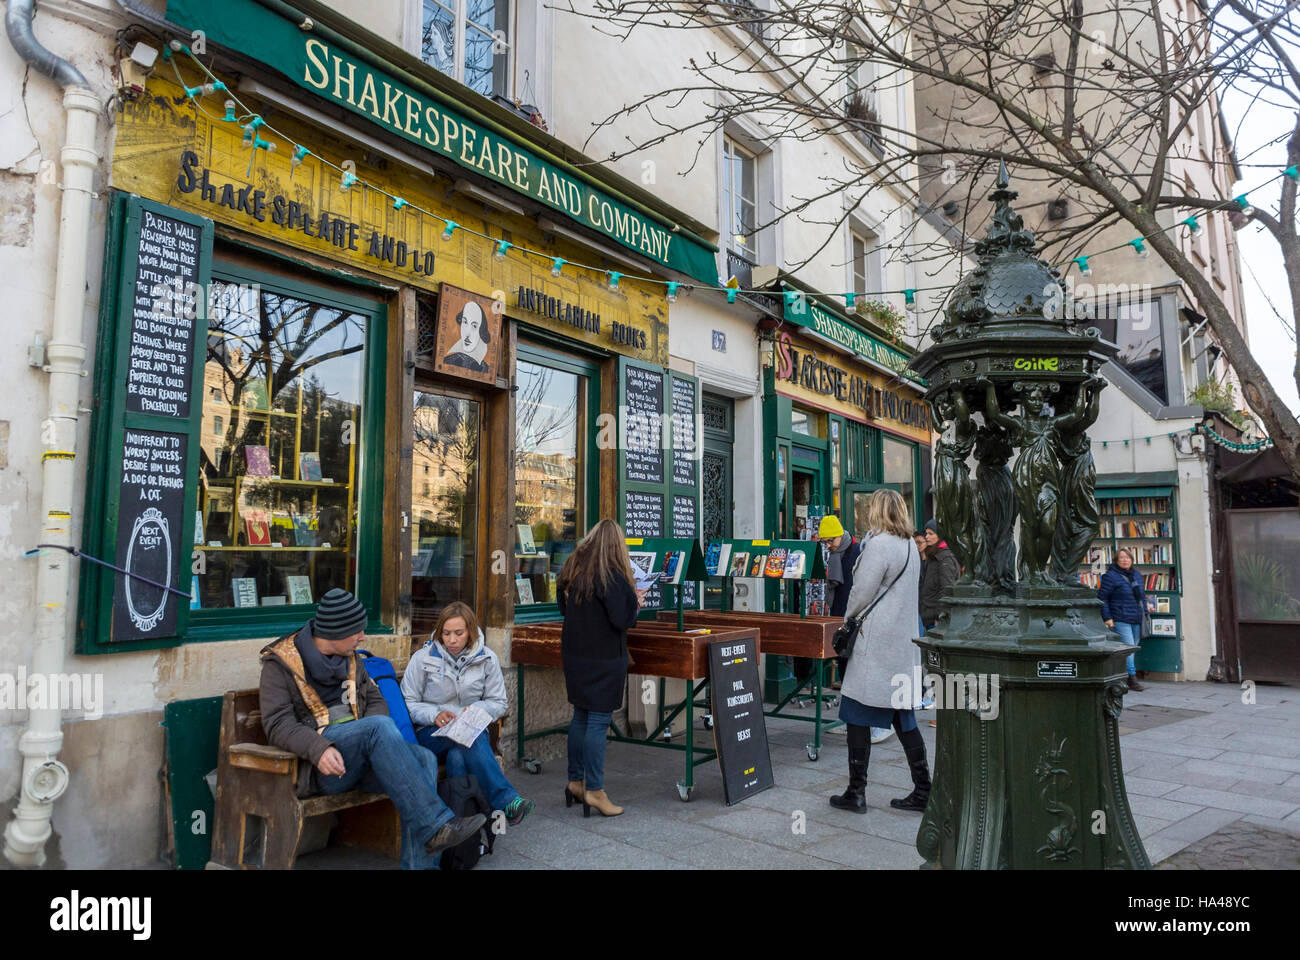 Paris, France, People Shopping, "Shakespeare and Company" Bookstore, Shop Front Window, with Sign, in Latin Quarter, Parisian street scene, vintage Stock Photo